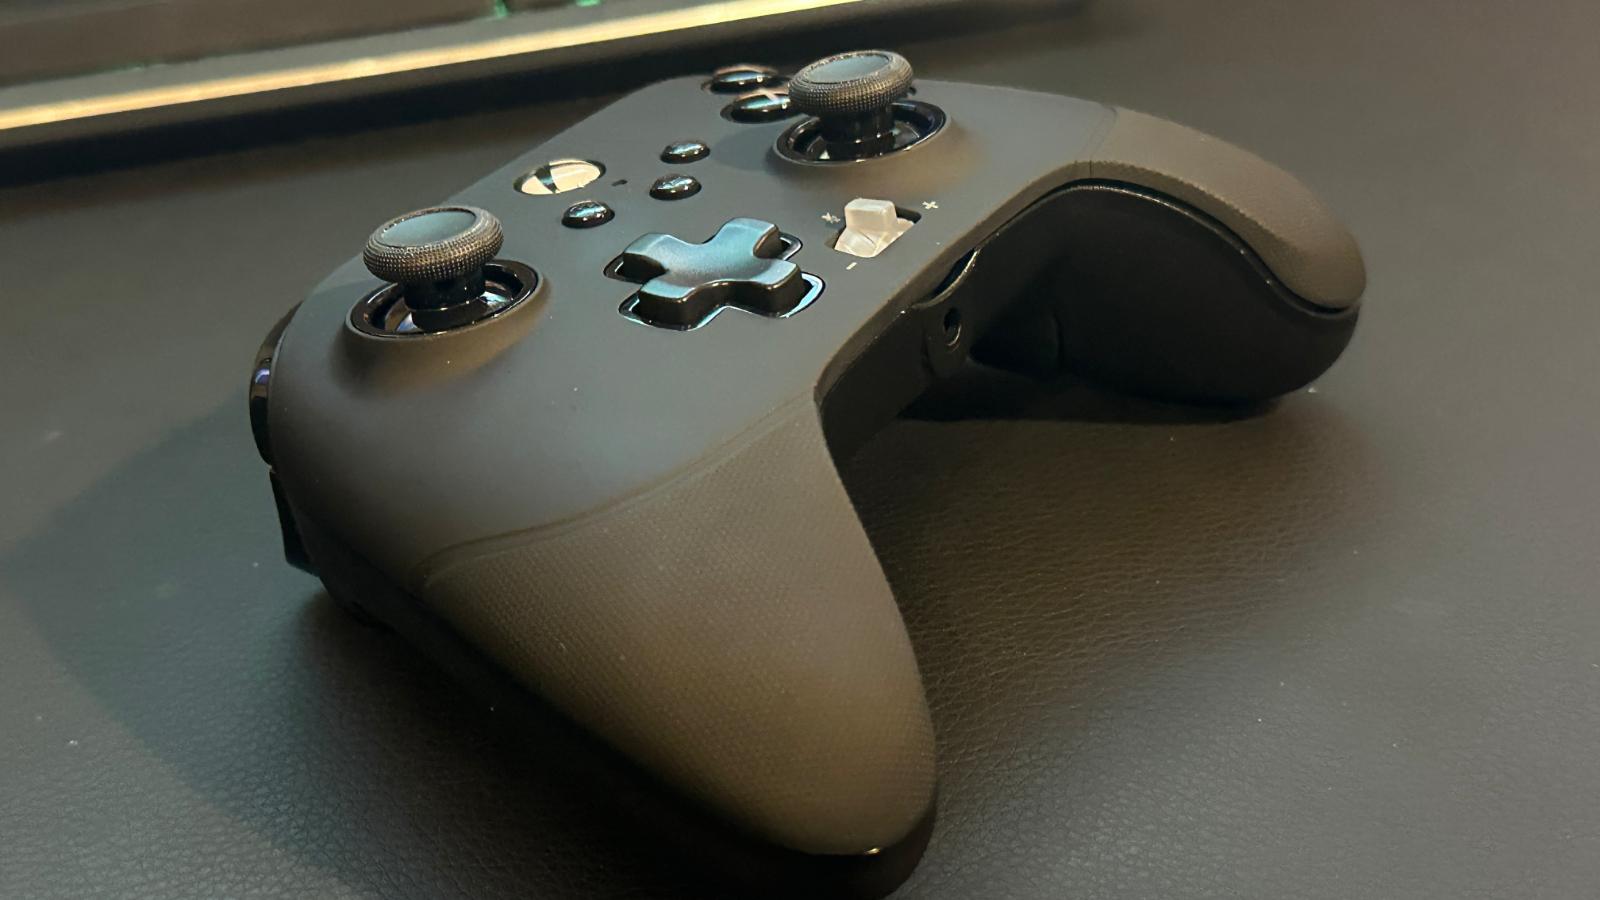 PowerA Fusion Pro 2 review: An Xbox Elite controller for less